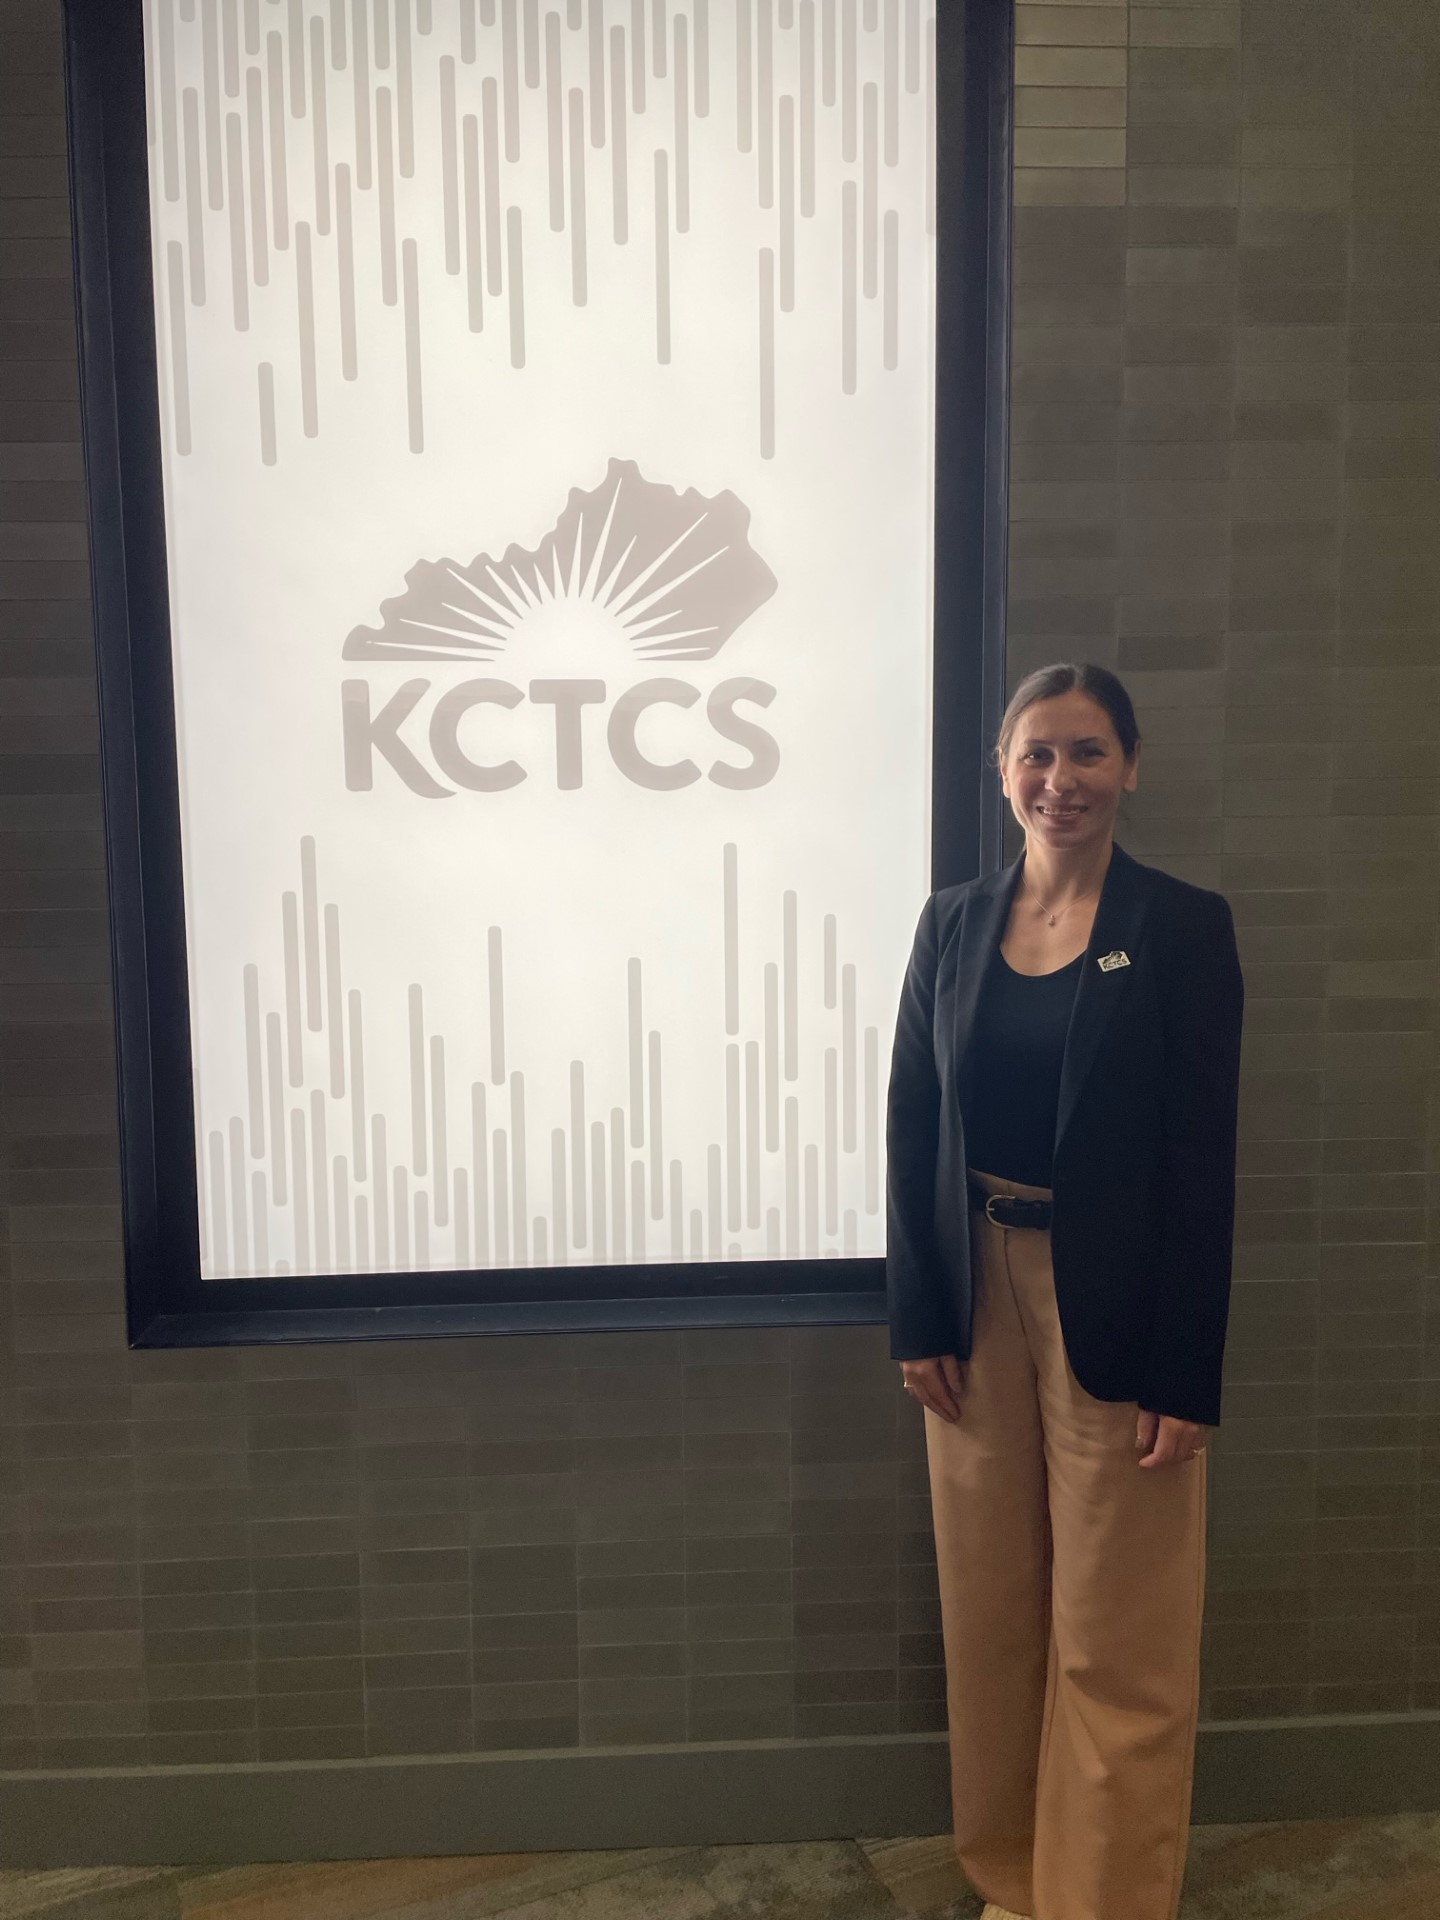 MCTC student Alexandra Martin standing with KCTCS signage.